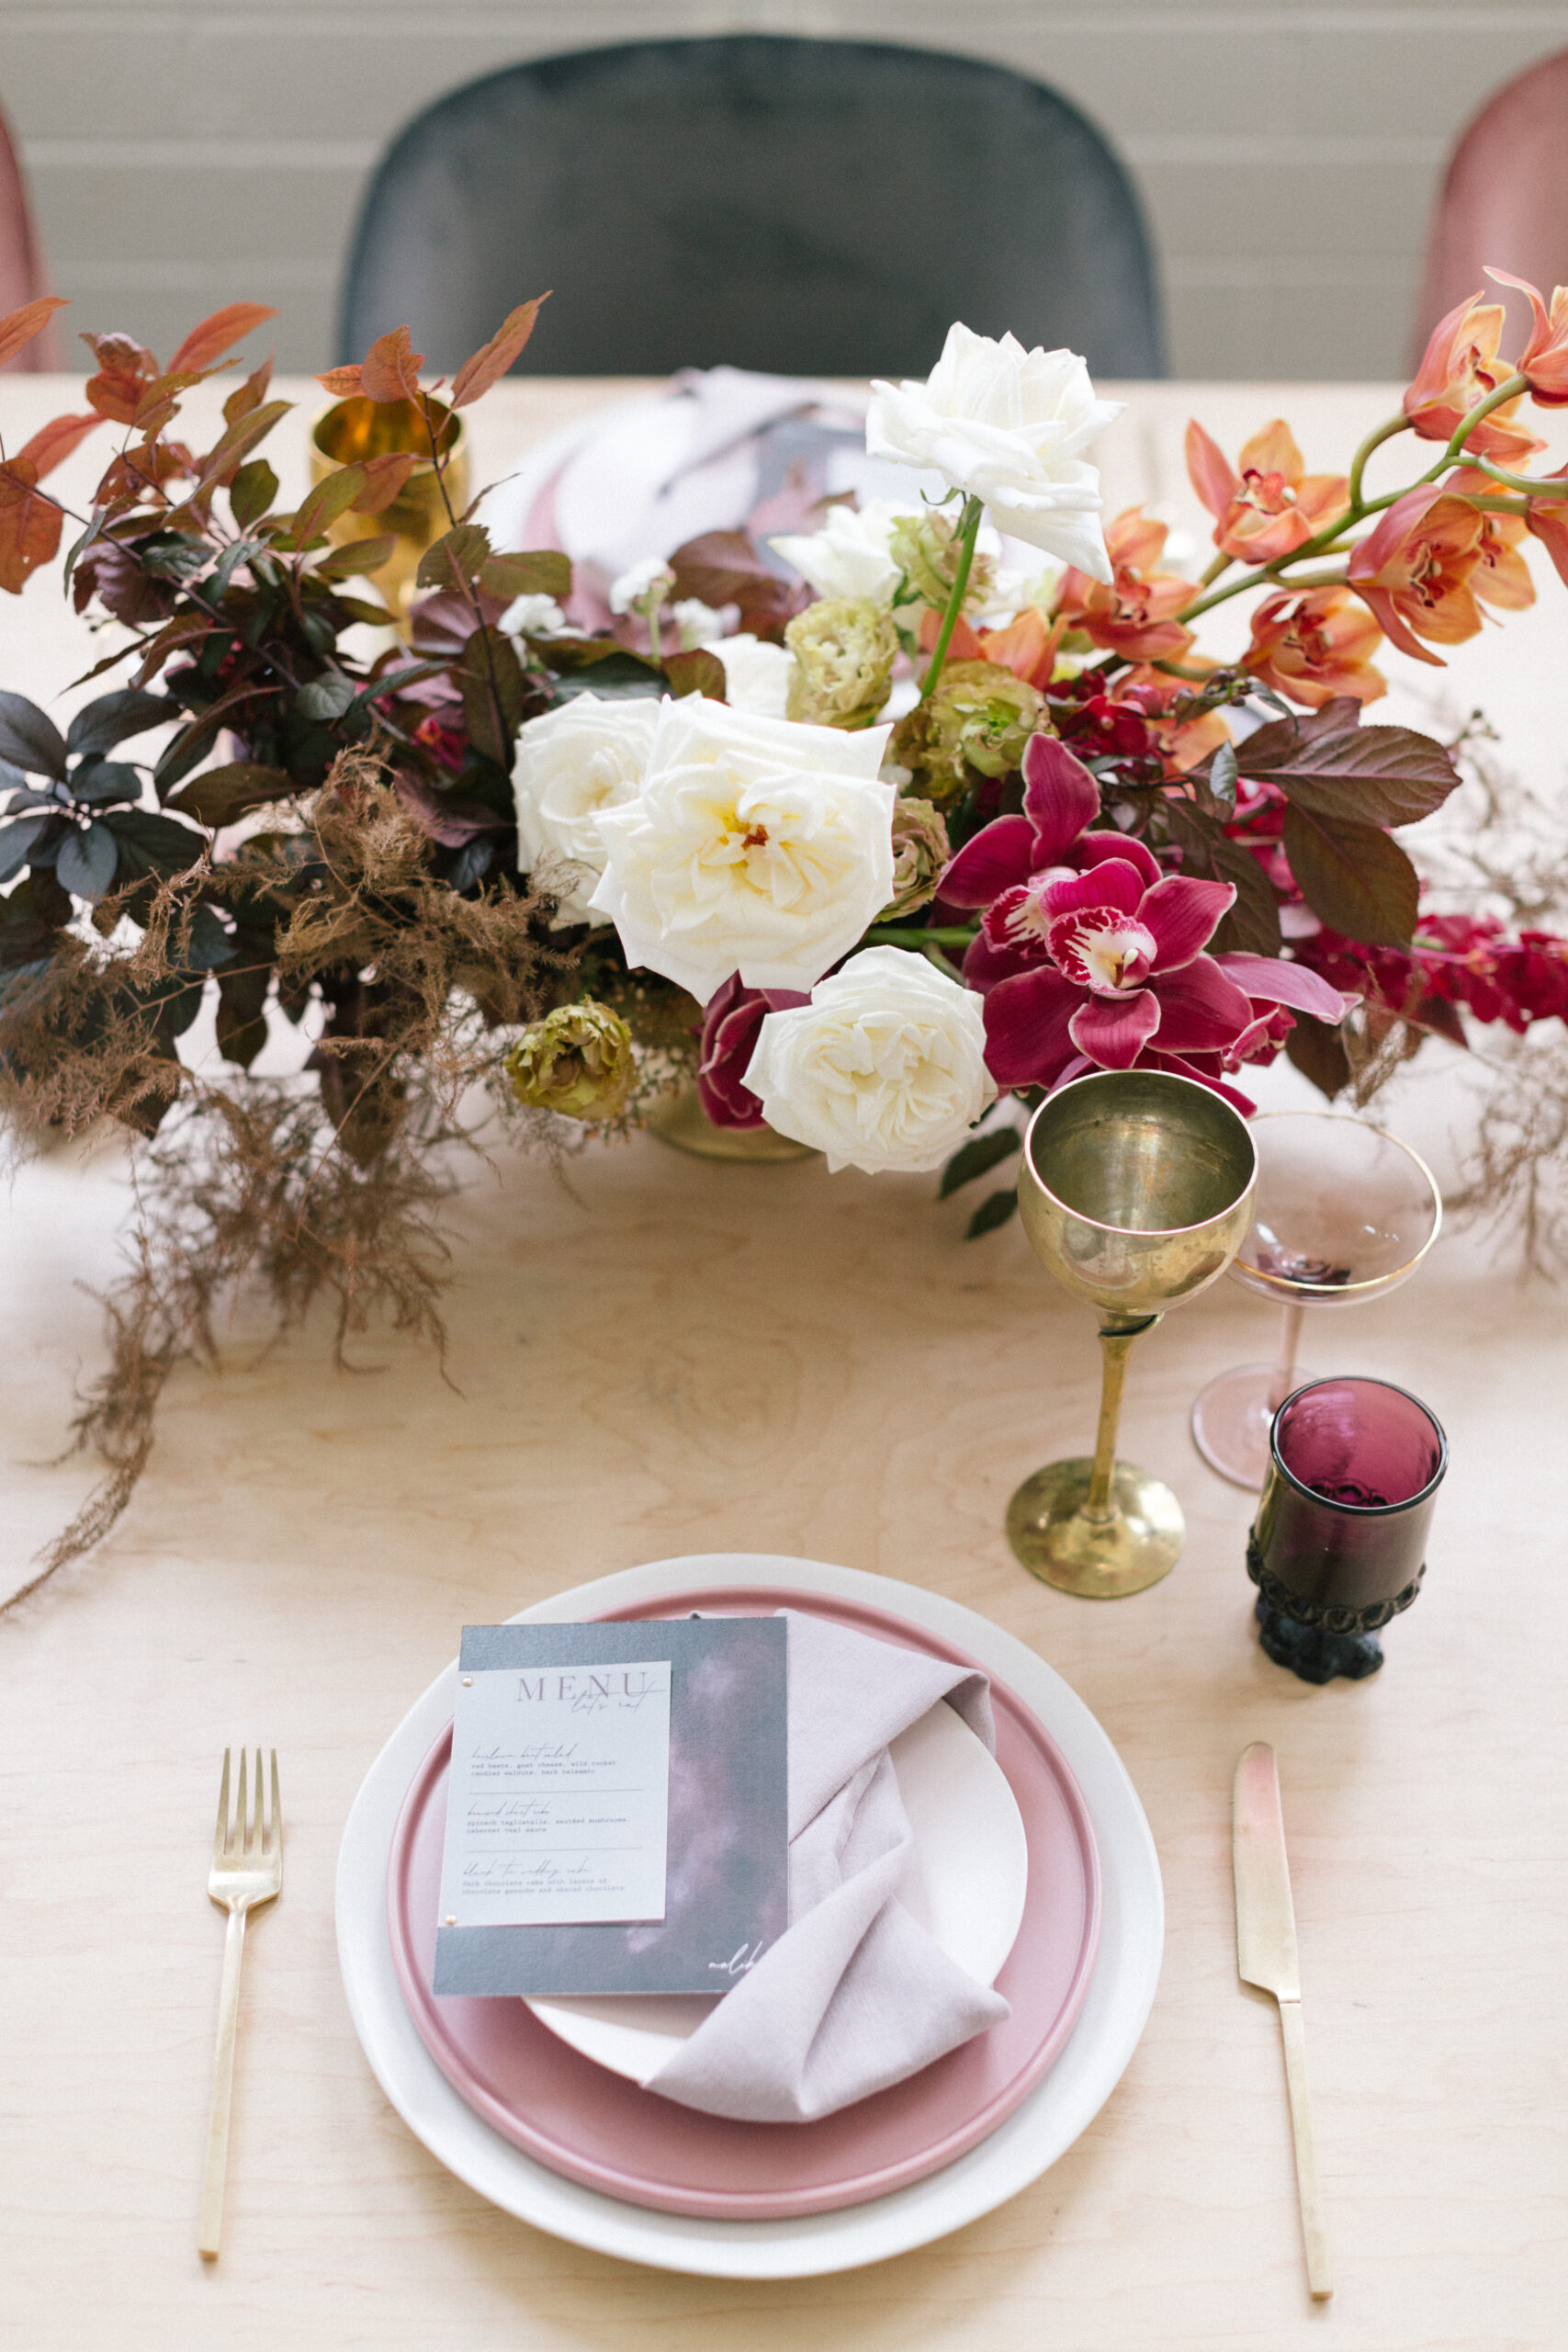 A table adorned with elegant flowers, accompanied by a charming display of a plate and glasses.